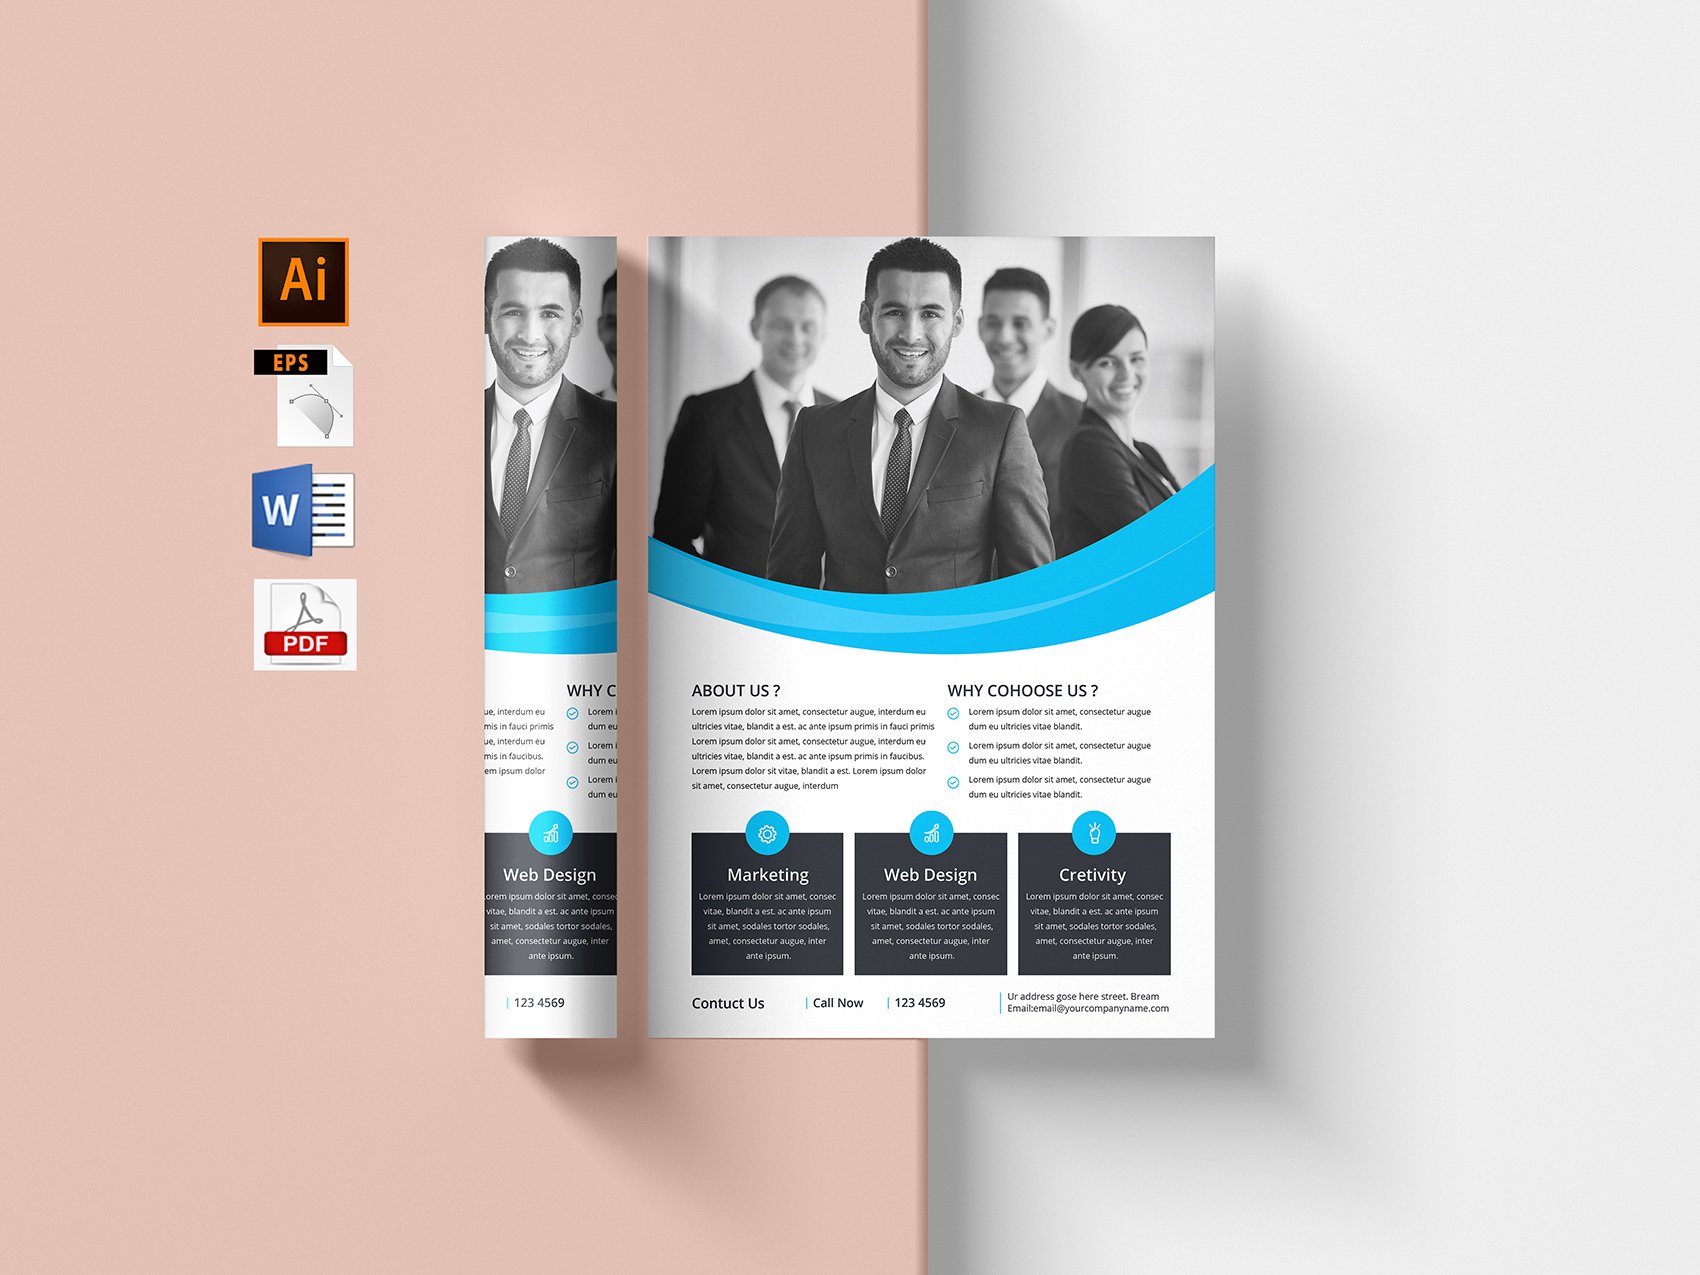 Business Flyer Template cover image.